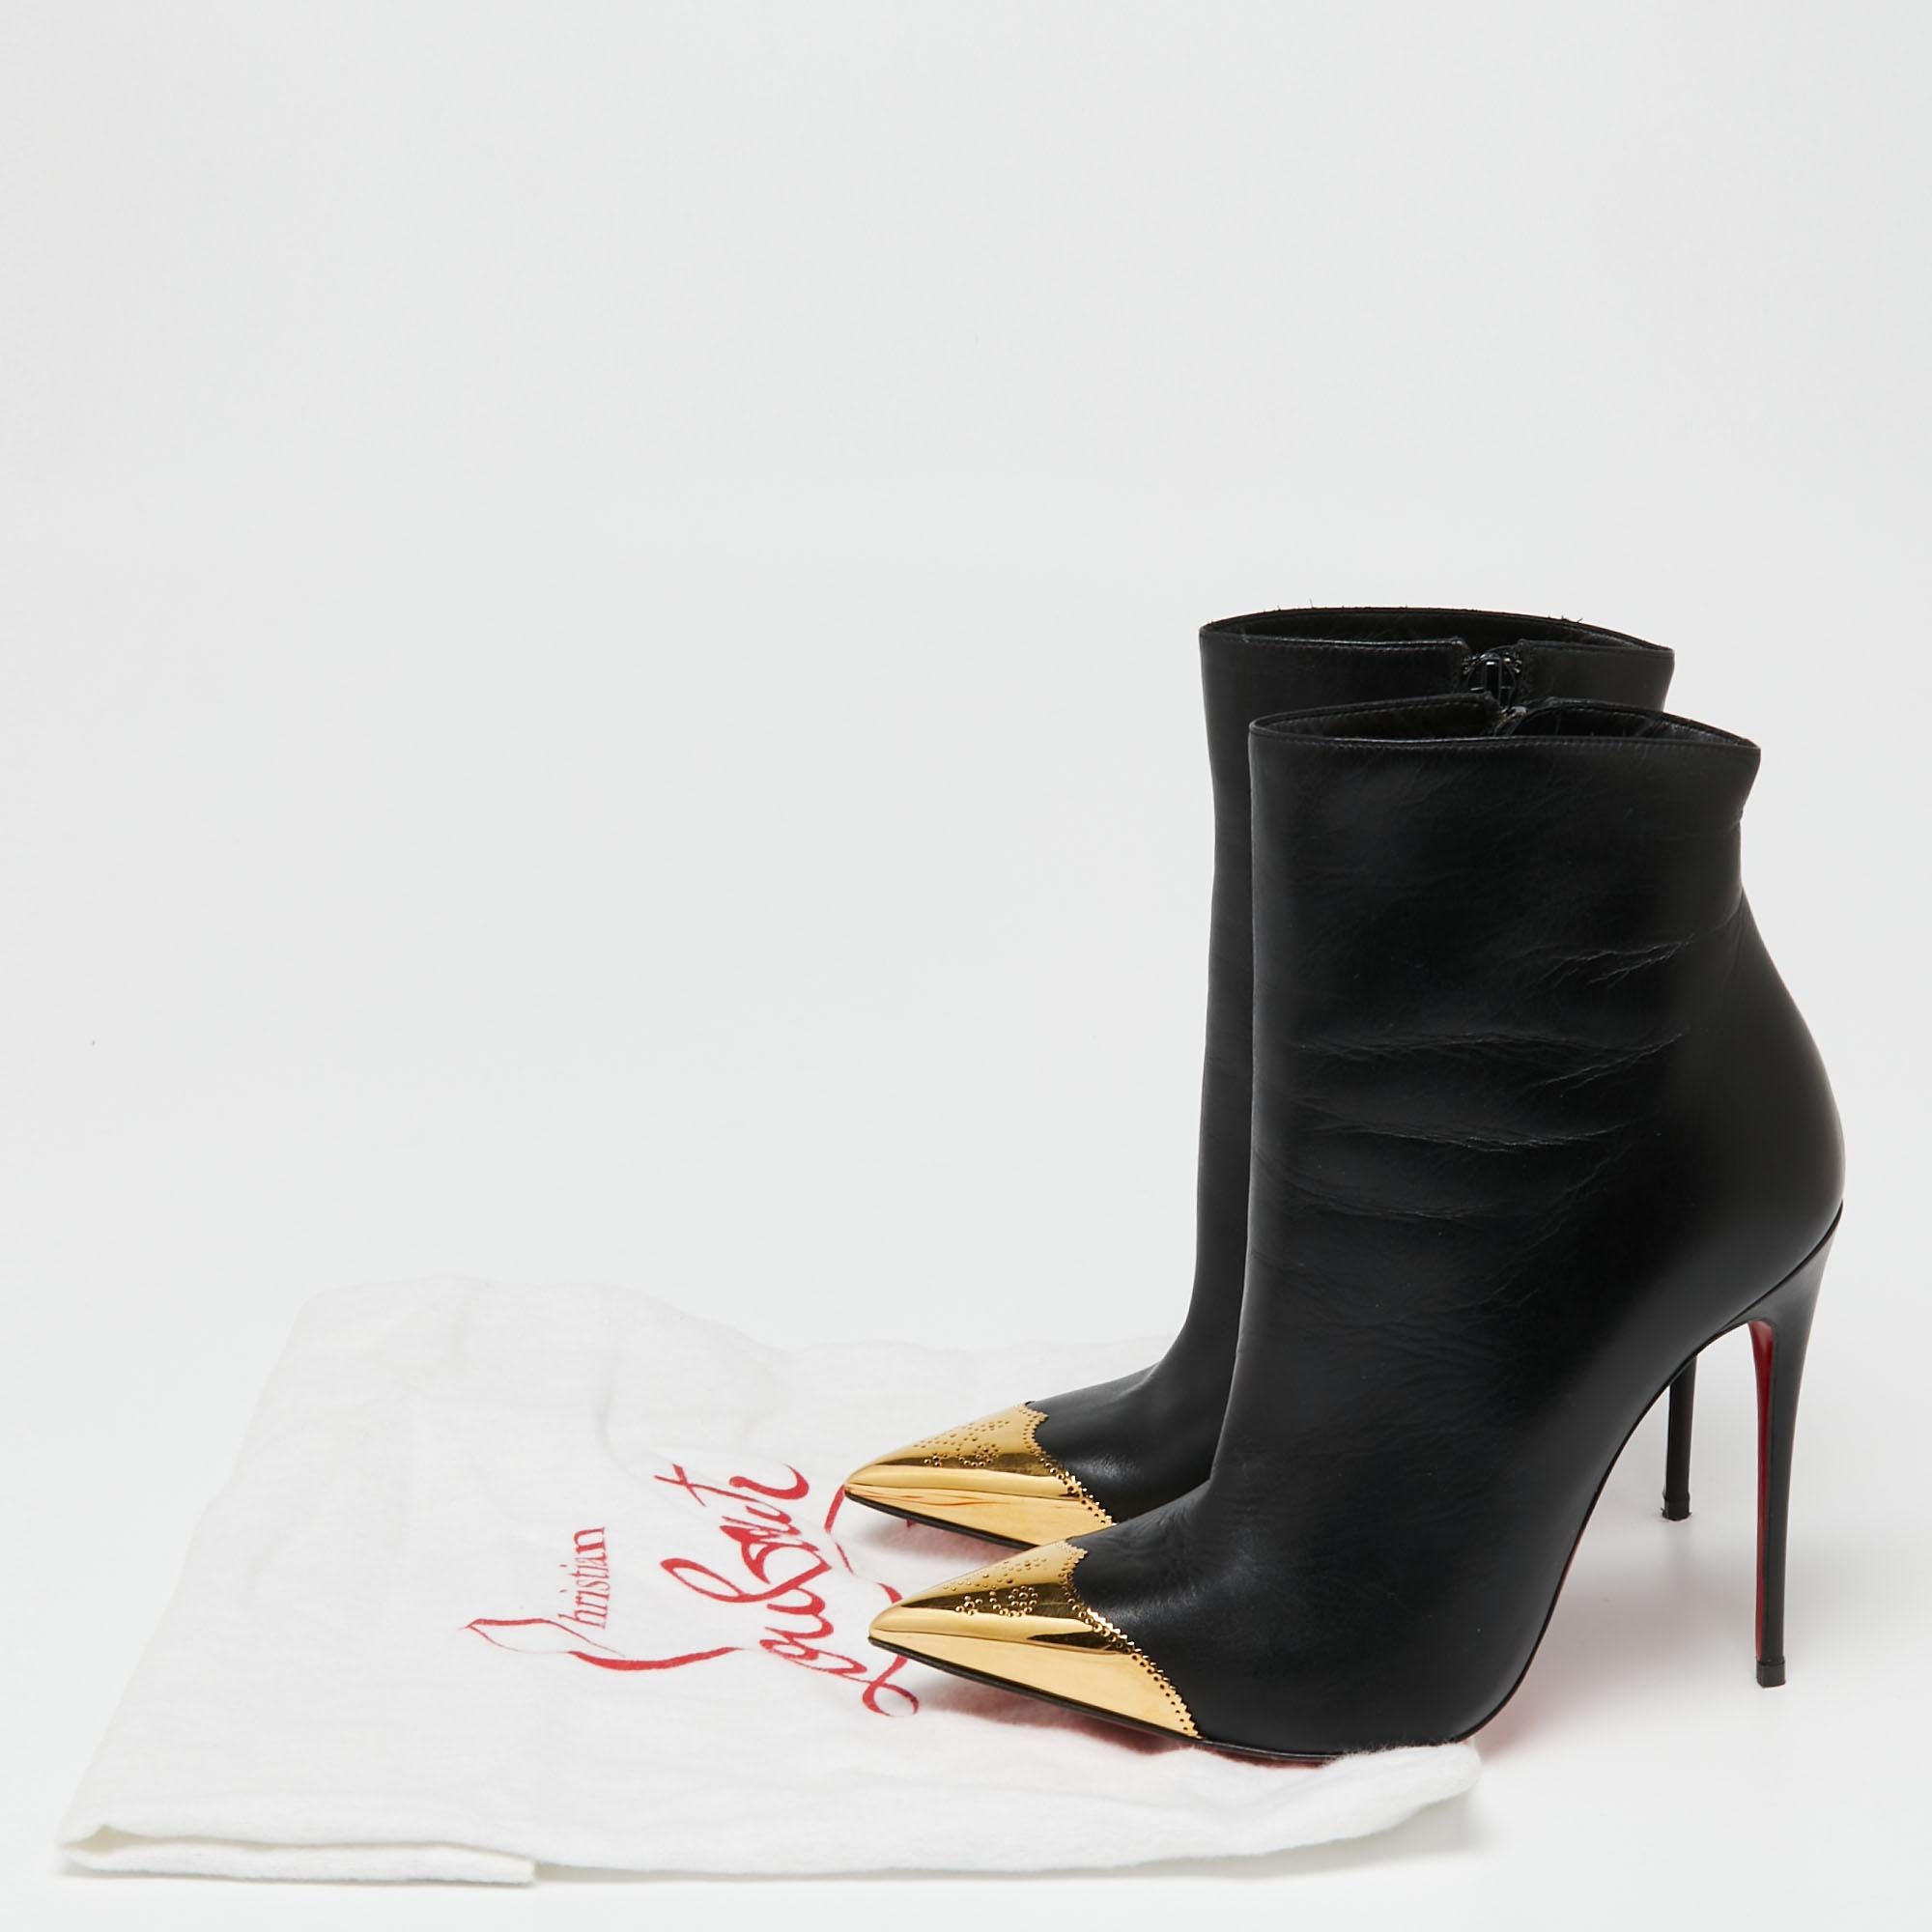 Christian Louboutin Black Leather Calamijane Pointed-Toe Ankle Booties Size 35.5 4